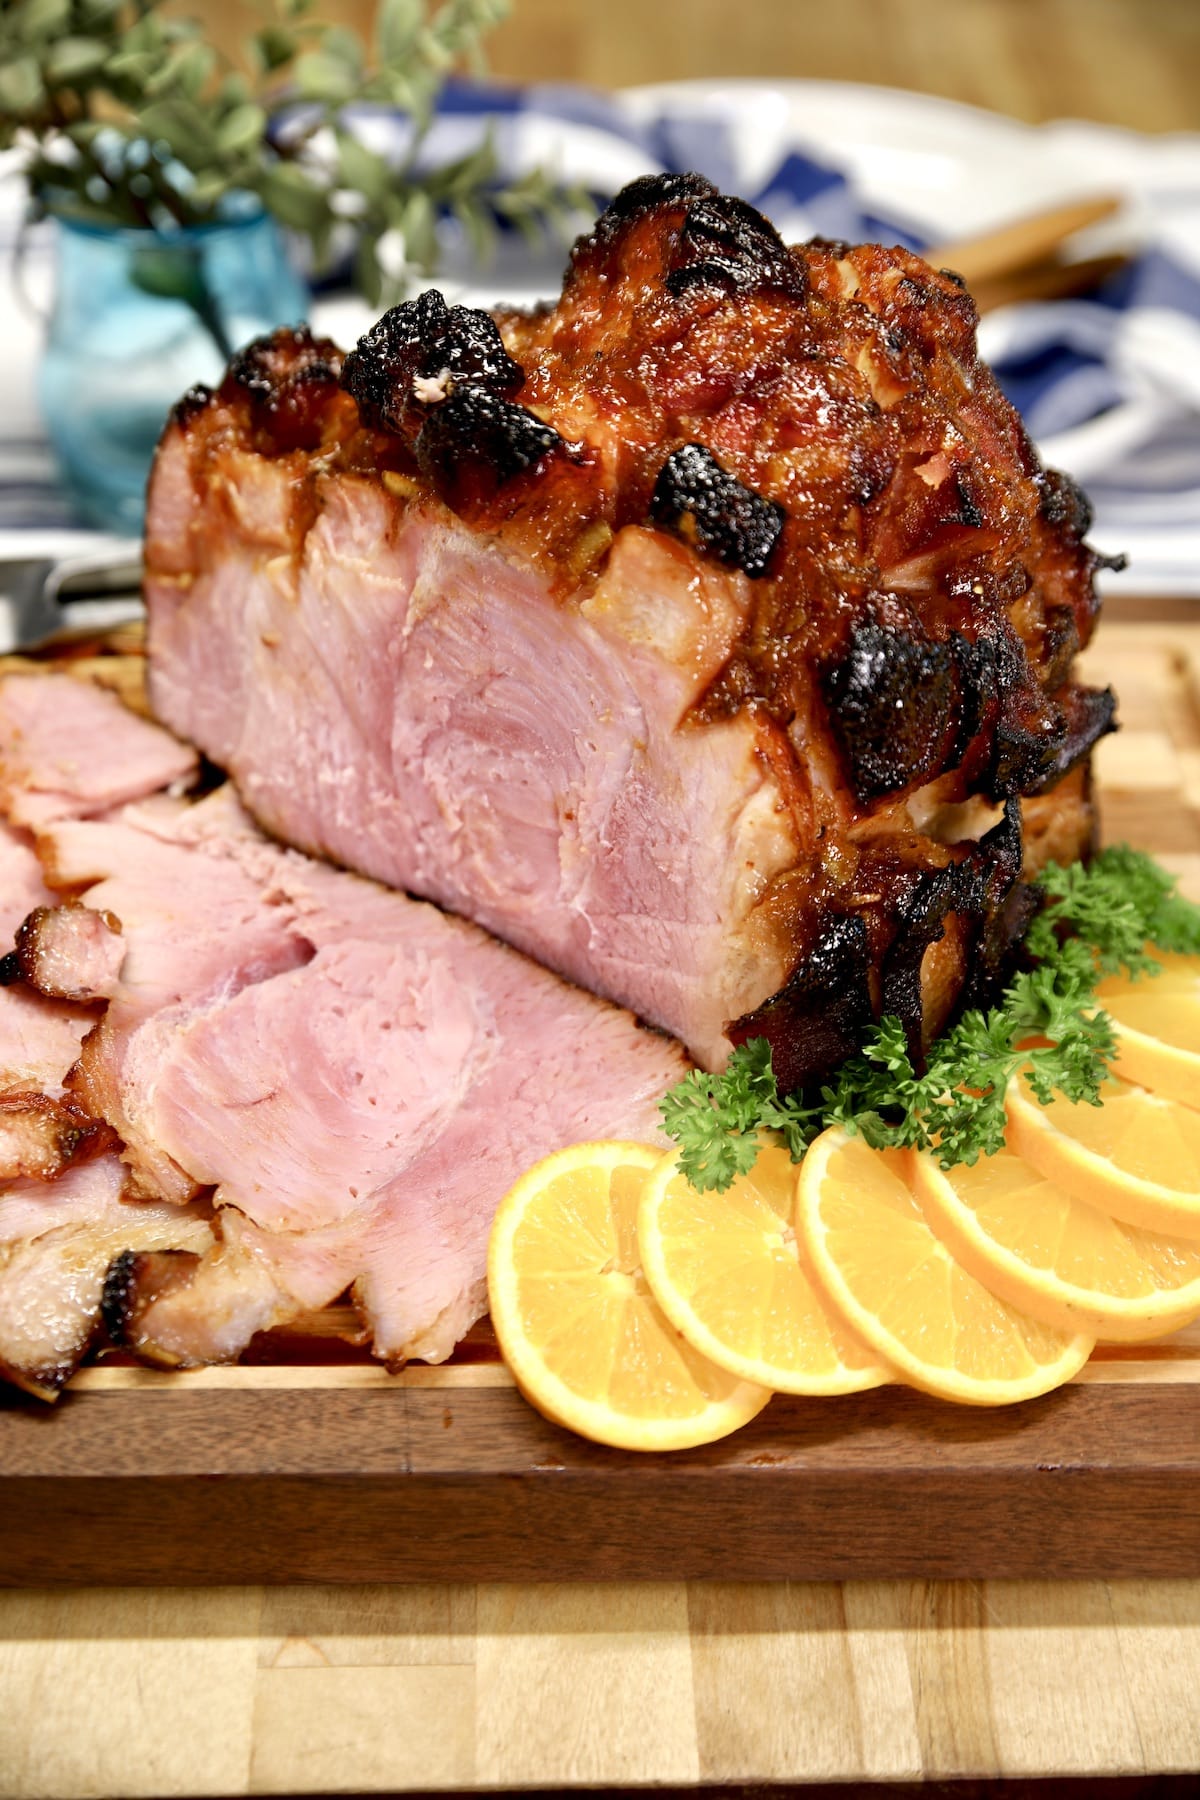 Orange glazed ham, partially sliced on a cutting board with orange slices and parsley.